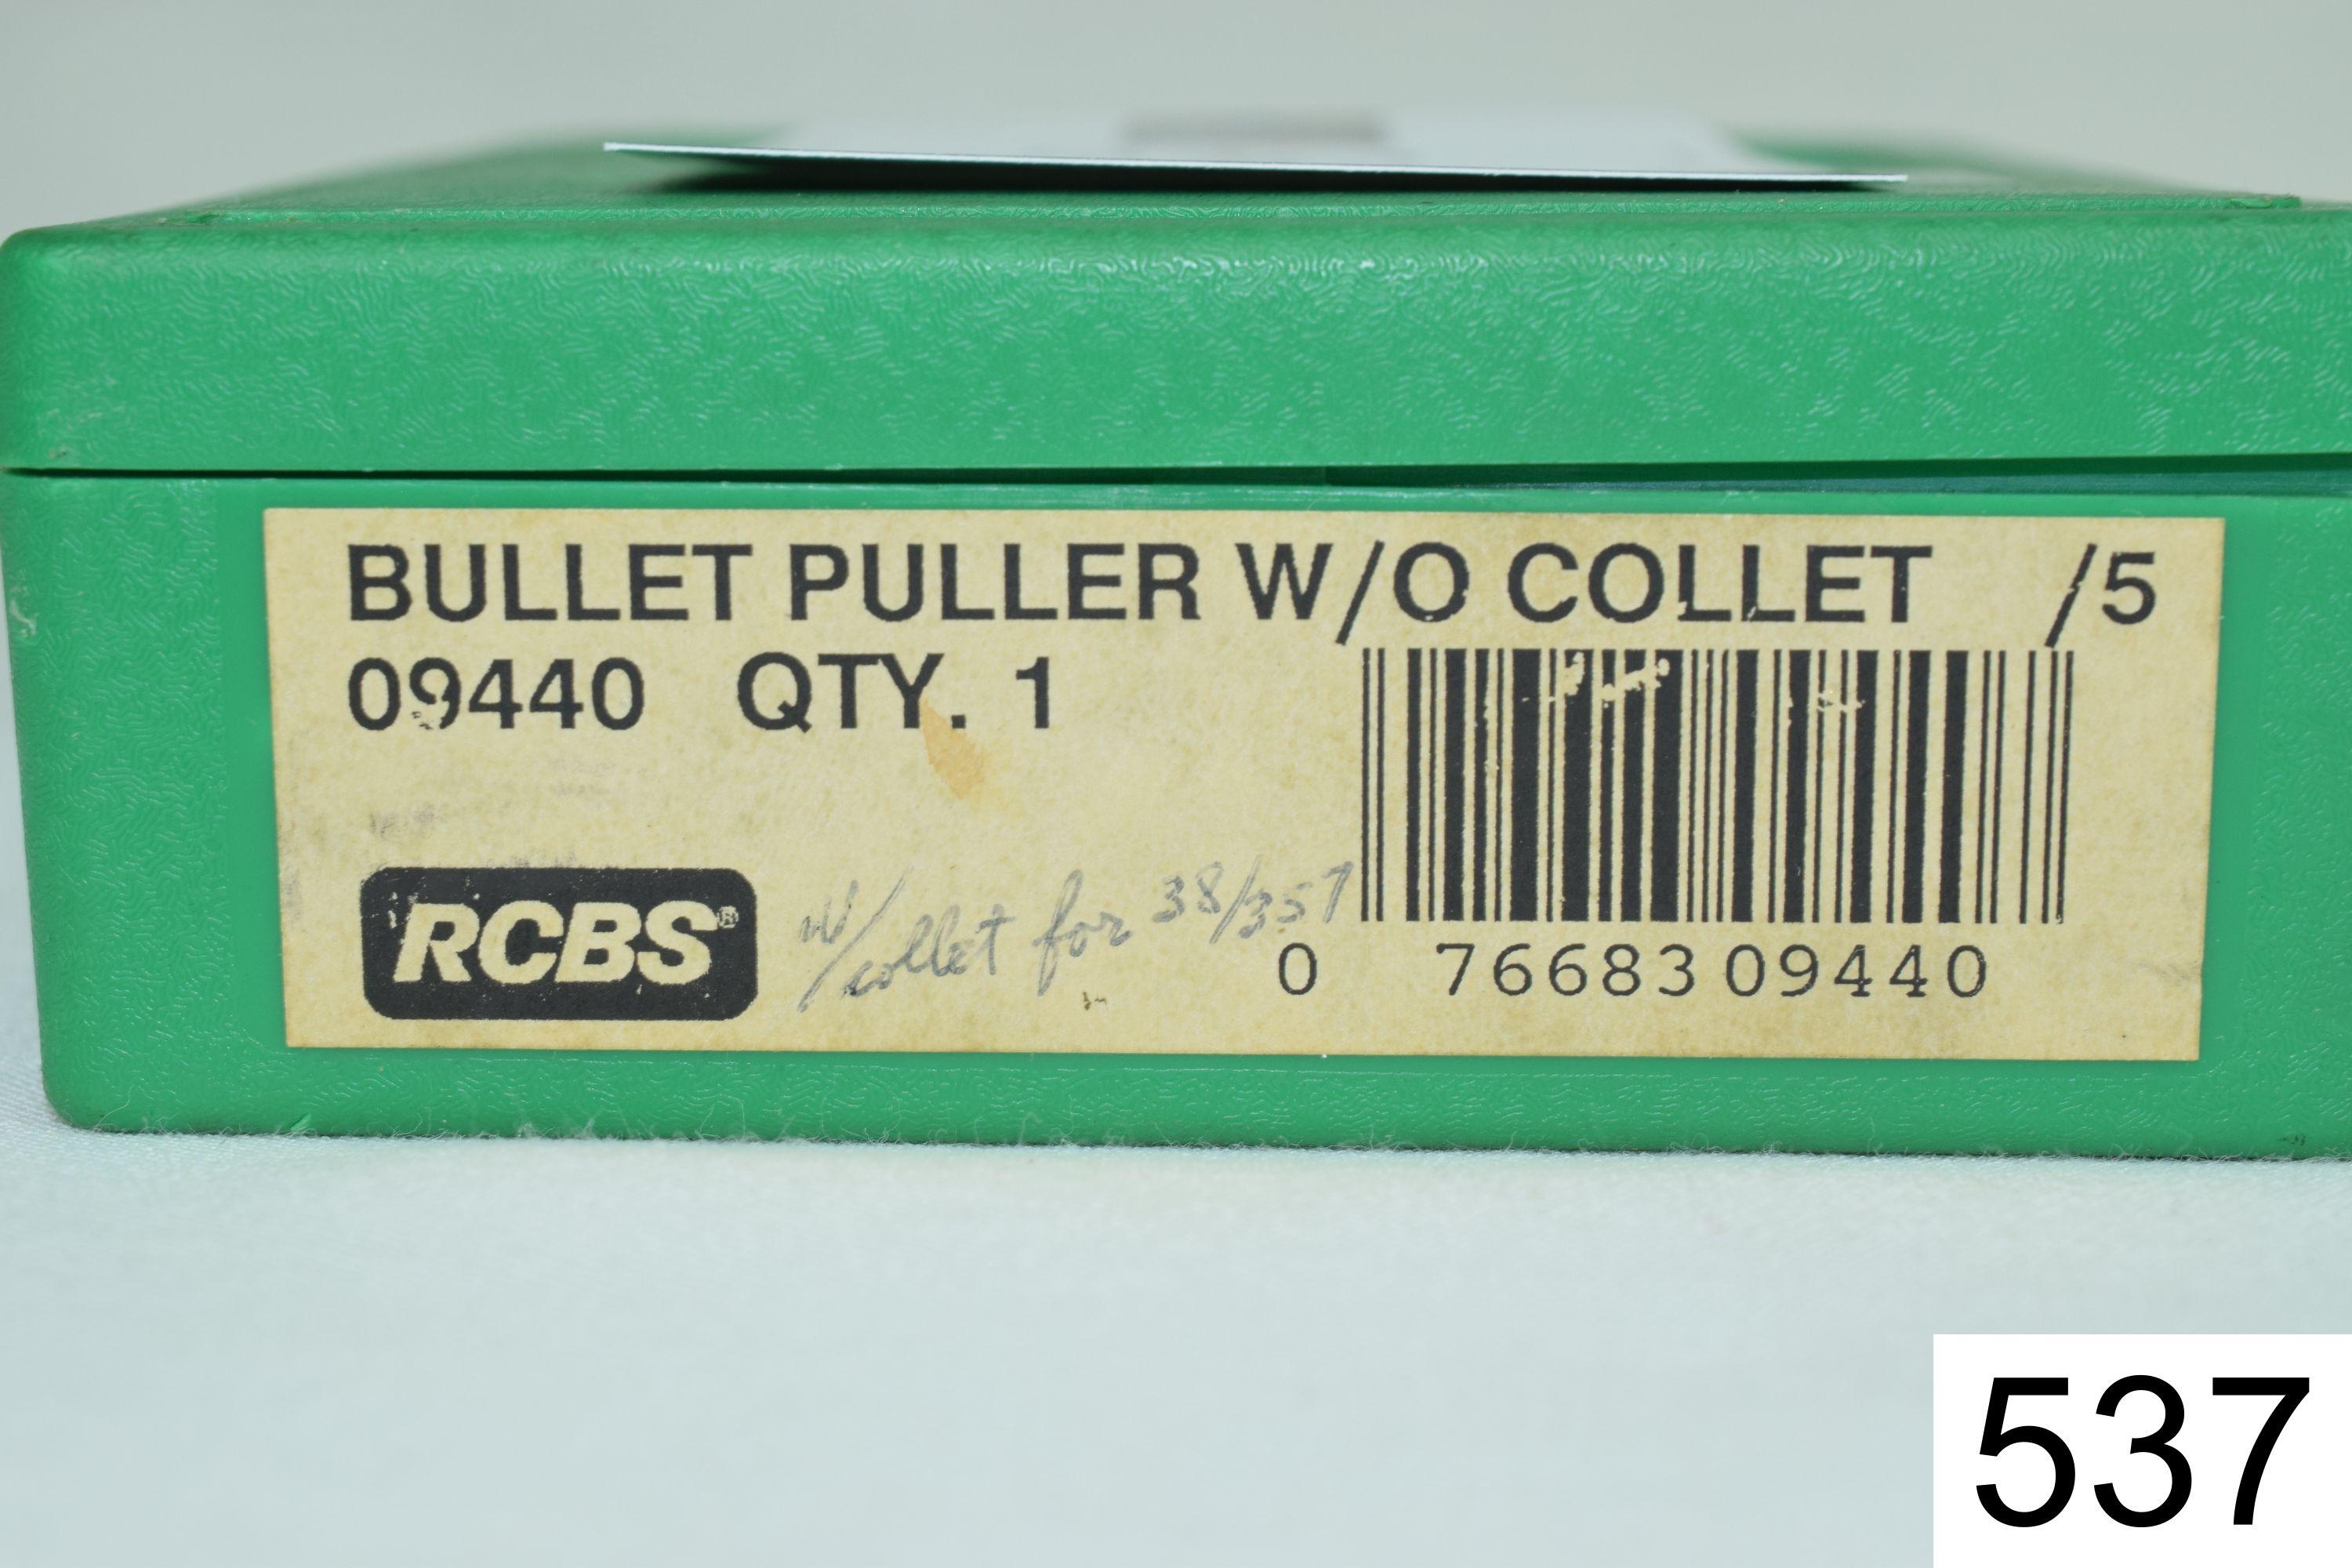 RCBS    Collet Bullet Puller    W/.22, .243, .25, .27, .30, .35 Collets    Condition: Excellent